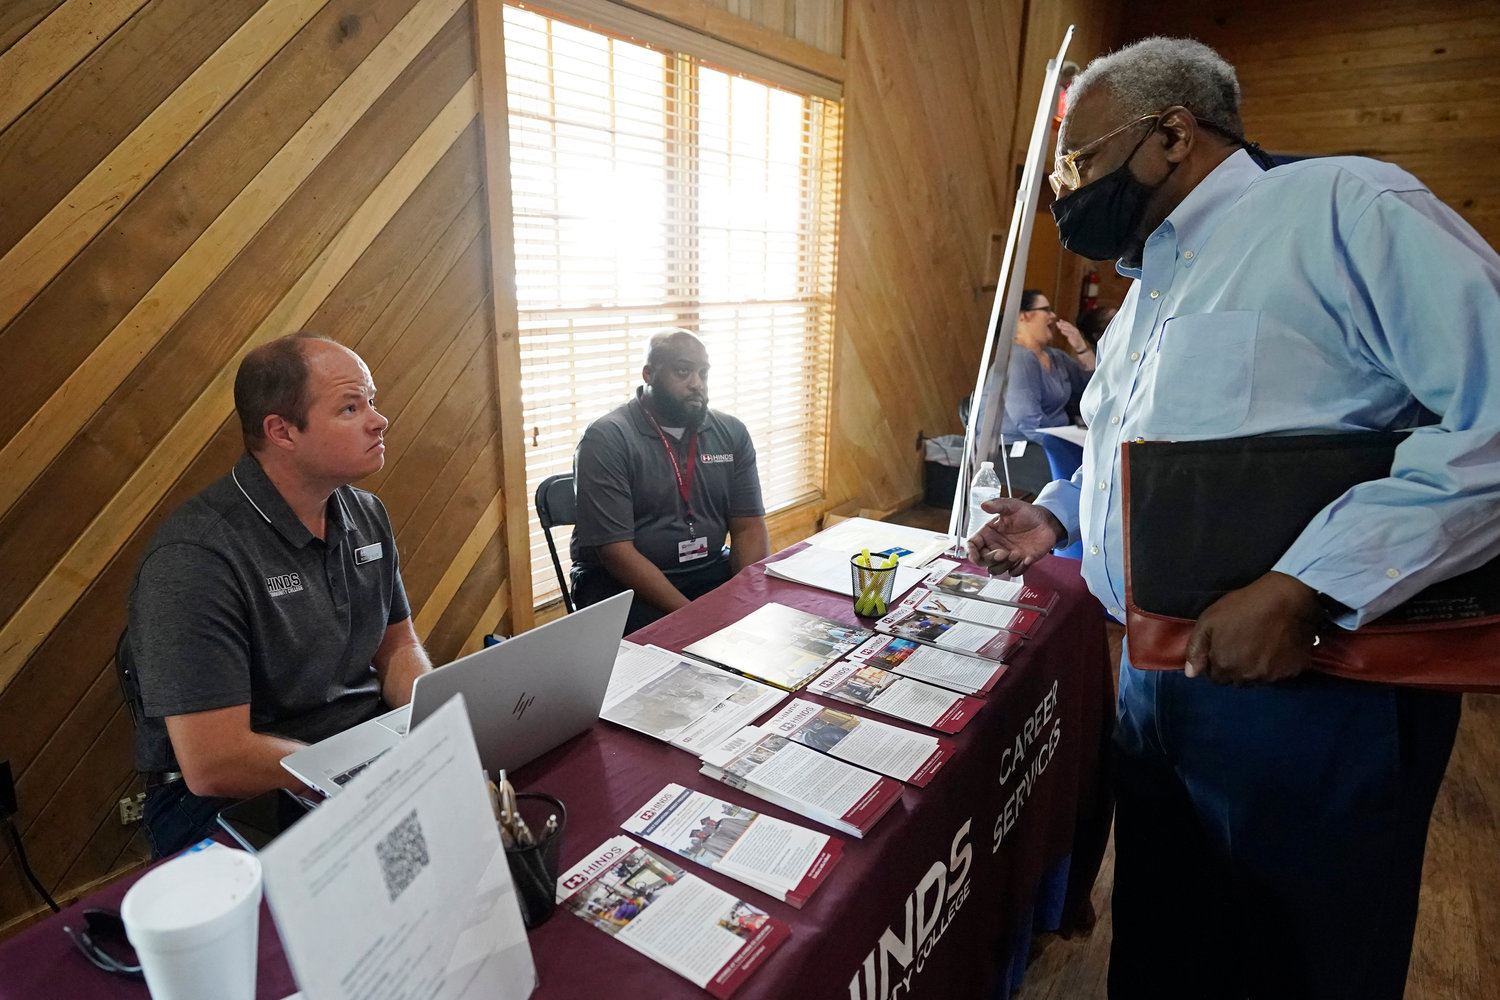 Robert Allen, director of work based learning, left, and Rod Mallett, work based learning coordinator, center, at Hinds Community College, discuss programs and opportunities with a job seeker, right, during the Mississippi Re-Entry Job Fair, in Jackson last month.